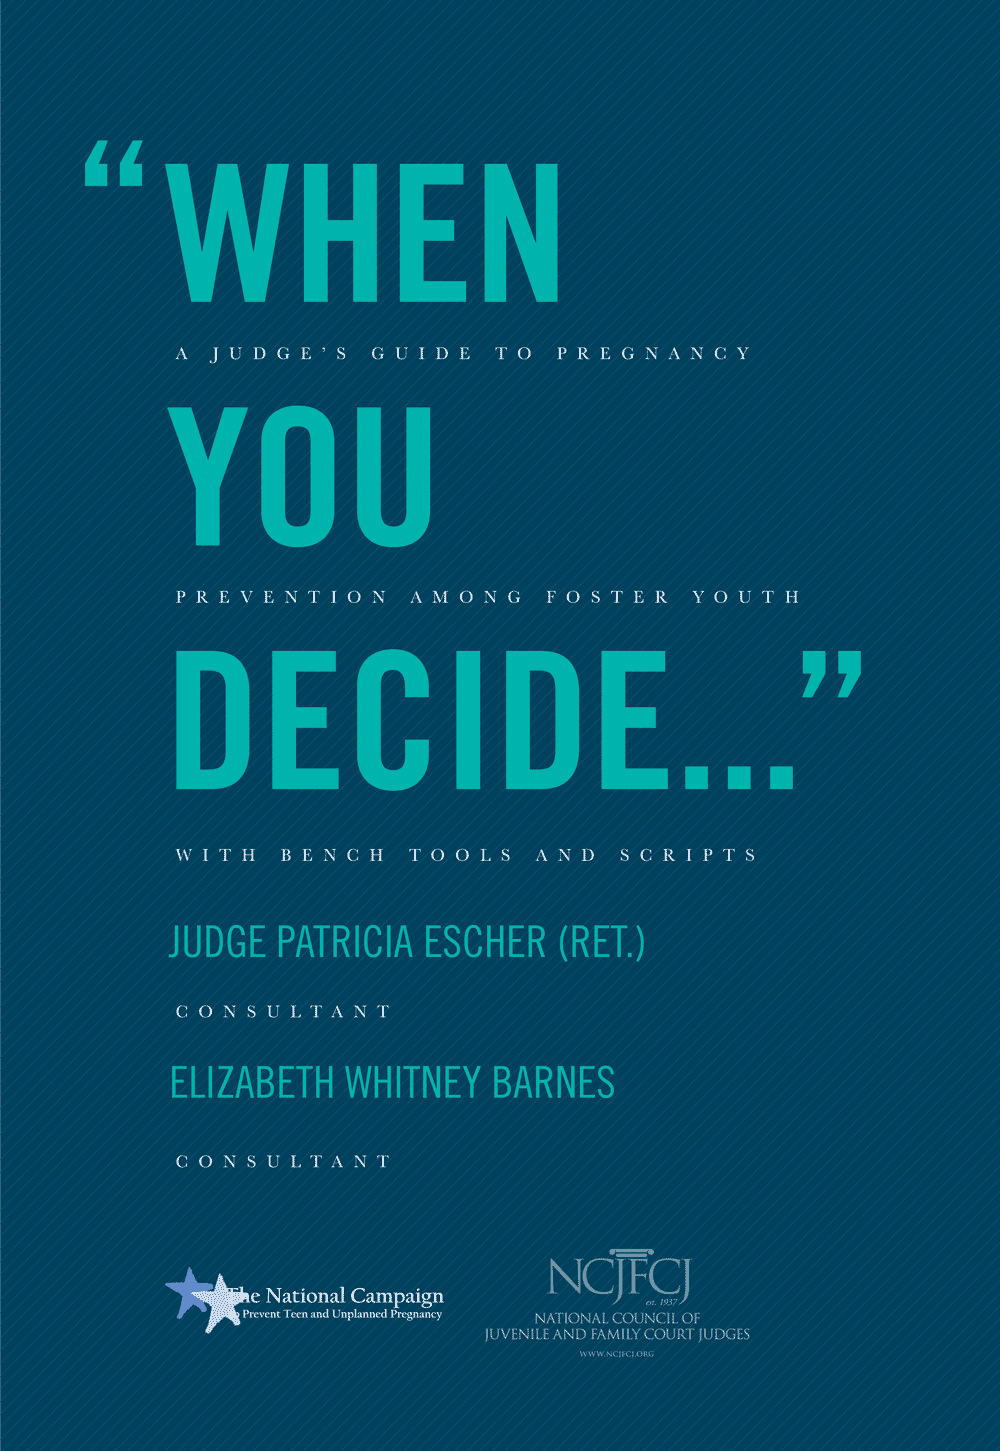 When You Decide: A Judge's Guide to Pregnancy Prevention Among Foster Youth